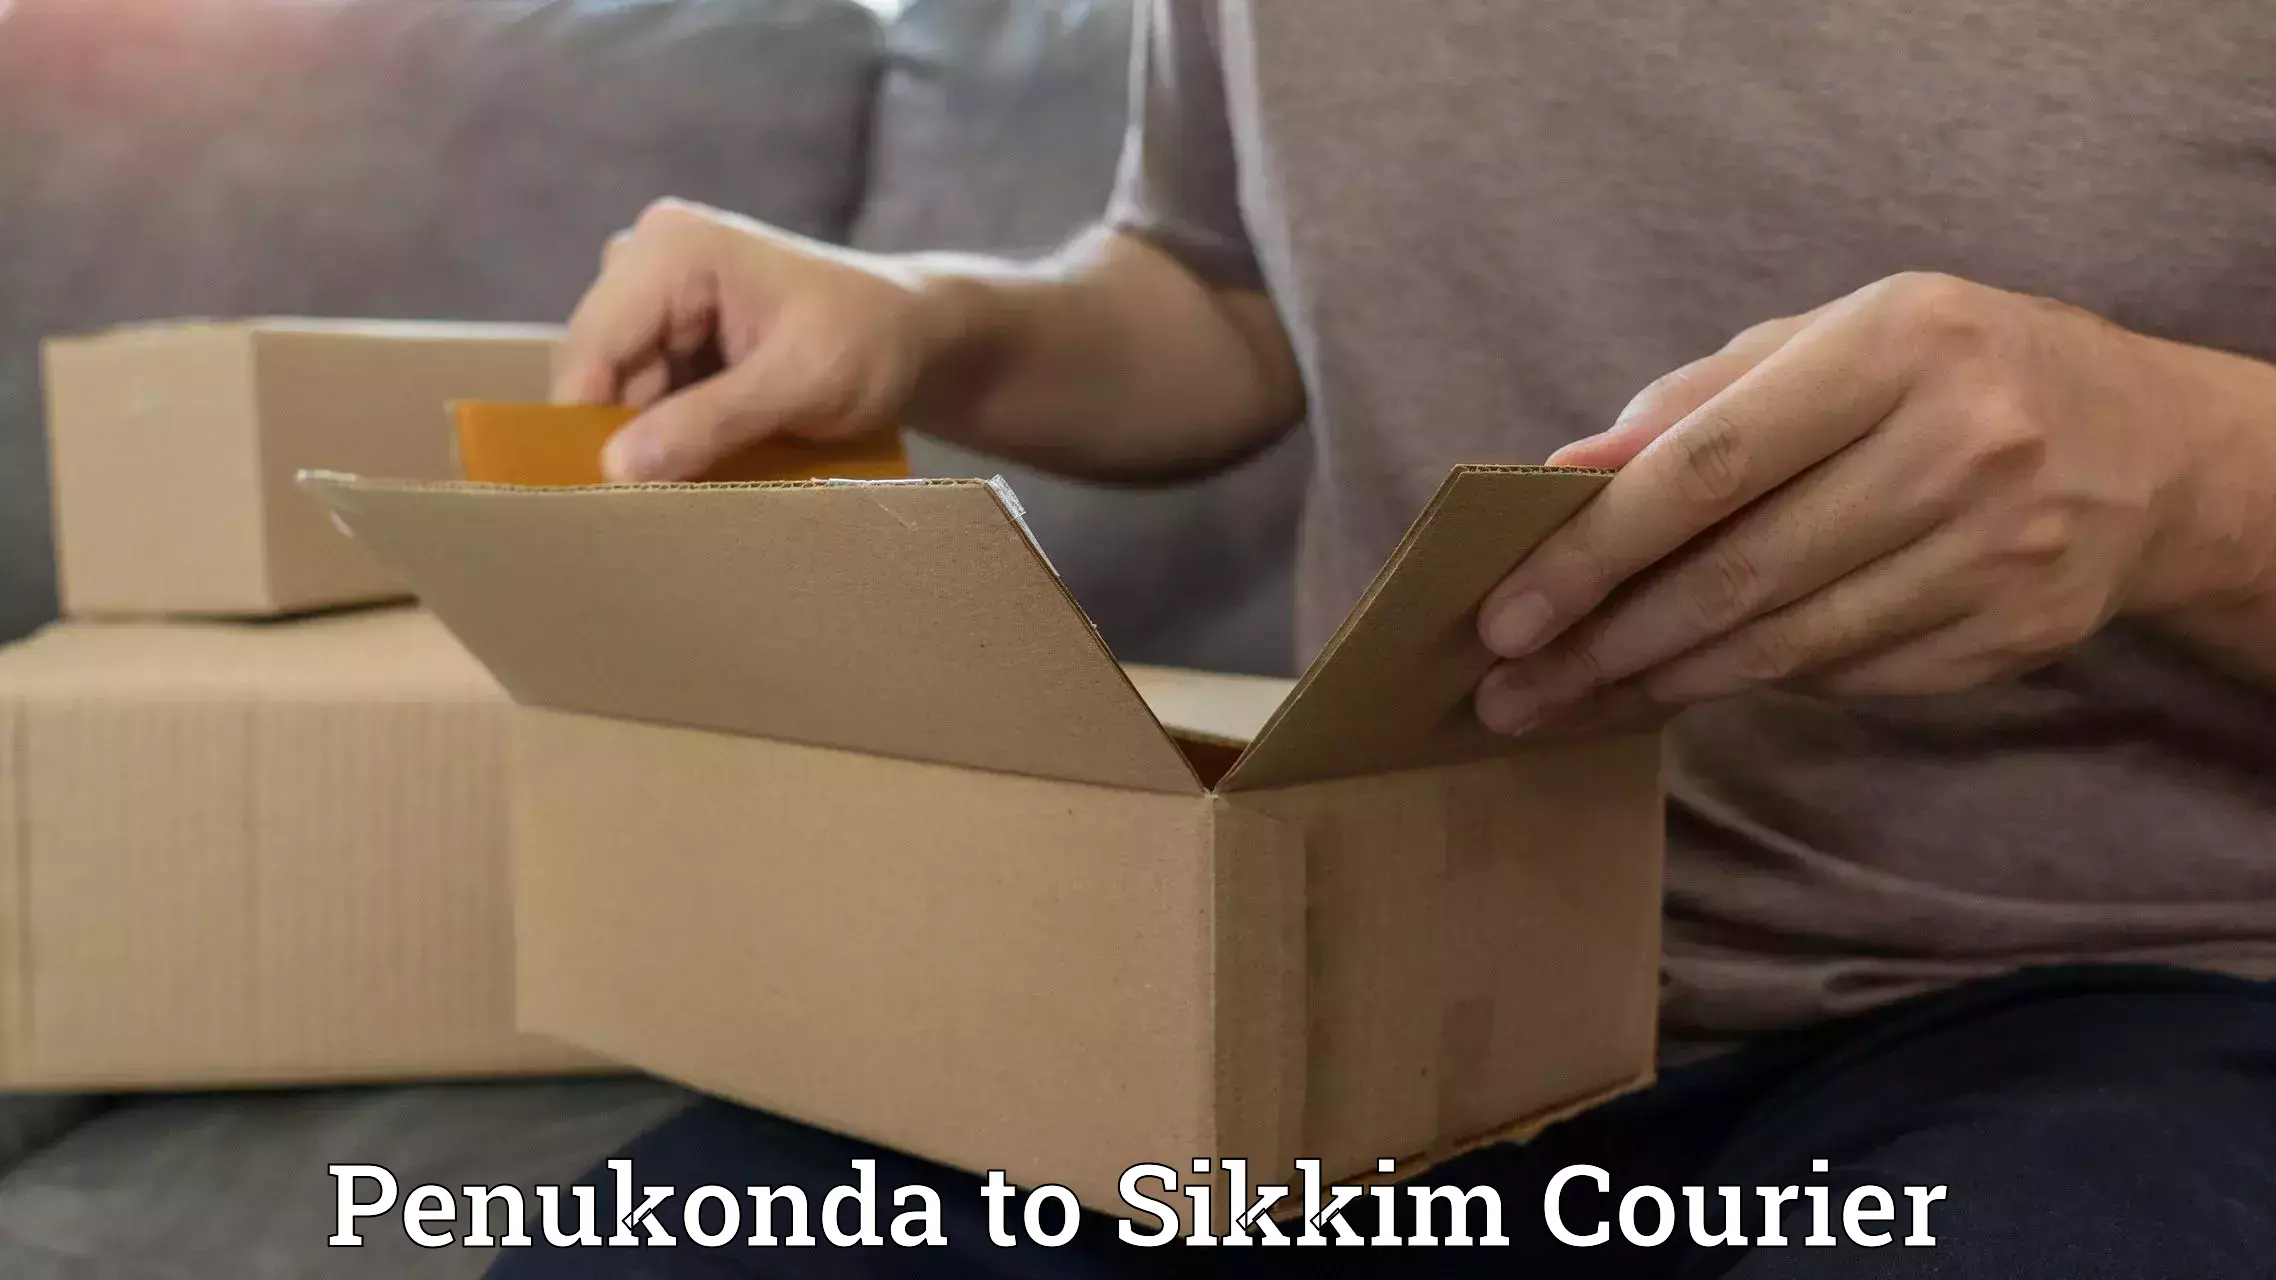 State-of-the-art courier technology Penukonda to Mangan